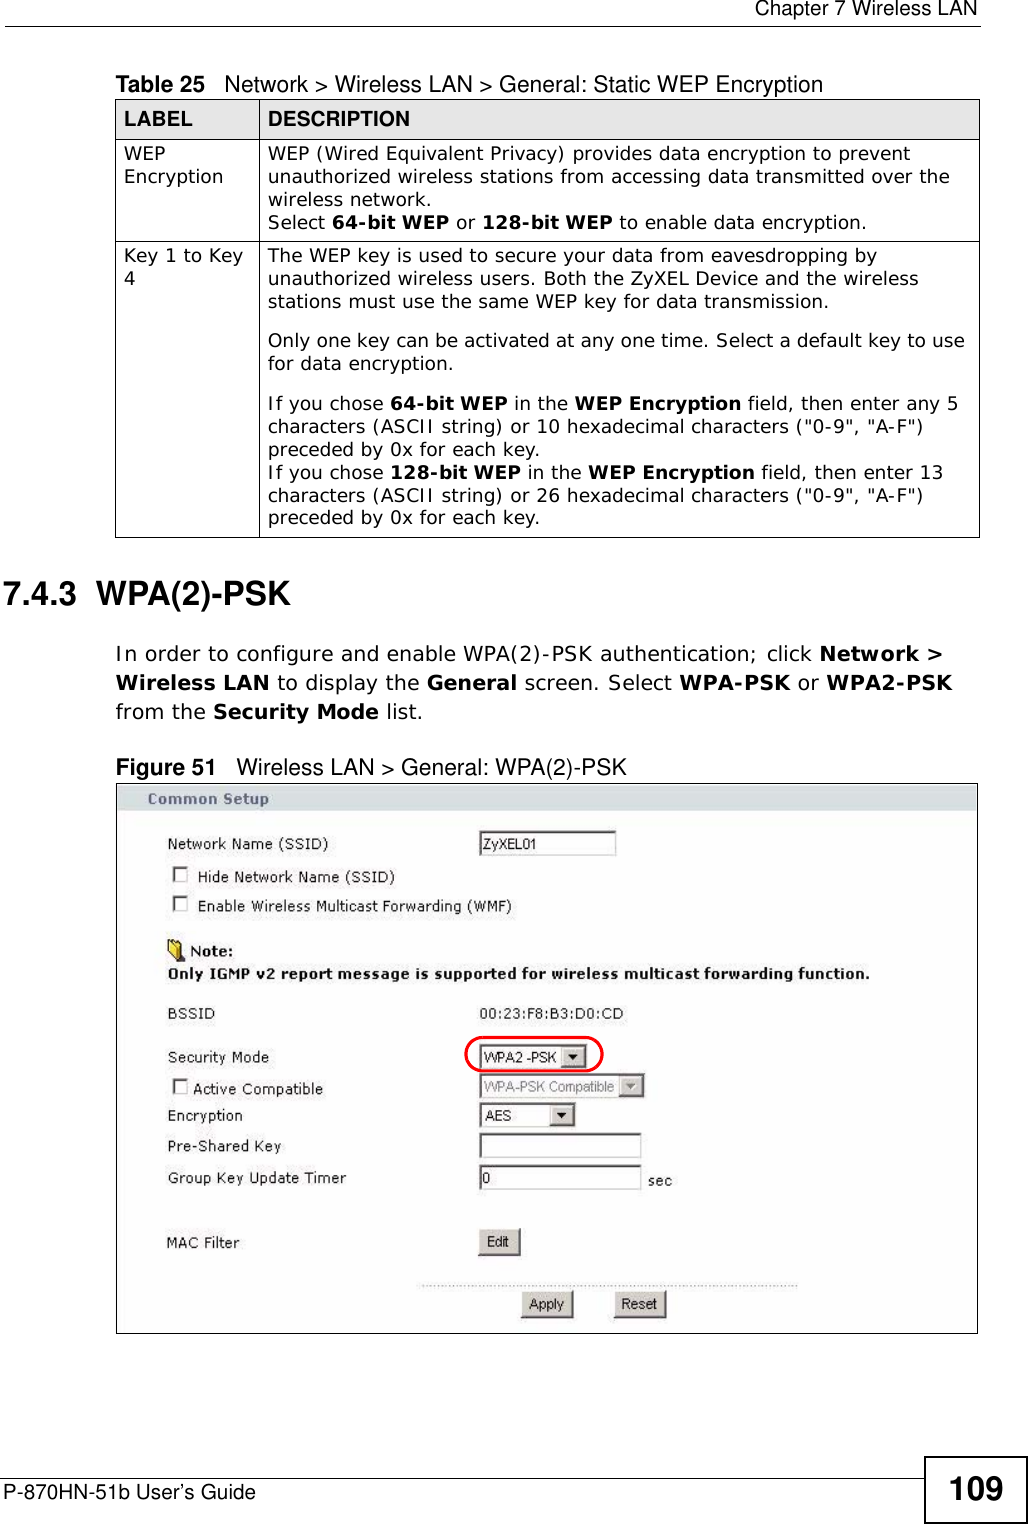  Chapter 7 Wireless LANP-870HN-51b User’s Guide 1097.4.3  WPA(2)-PSK In order to configure and enable WPA(2)-PSK authentication; click Network &gt; Wireless LAN to display the General screen. Select WPA-PSK or WPA2-PSK from the Security Mode list.Figure 51   Wireless LAN &gt; General: WPA(2)-PSKWEP Encryption WEP (Wired Equivalent Privacy) provides data encryption to prevent unauthorized wireless stations from accessing data transmitted over the wireless network. Select 64-bit WEP or 128-bit WEP to enable data encryption.  Key 1 to Key 4The WEP key is used to secure your data from eavesdropping by unauthorized wireless users. Both the ZyXEL Device and the wireless stations must use the same WEP key for data transmission.Only one key can be activated at any one time. Select a default key to use for data encryption.If you chose 64-bit WEP in the WEP Encryption field, then enter any 5 characters (ASCII string) or 10 hexadecimal characters (&quot;0-9&quot;, &quot;A-F&quot;) preceded by 0x for each key.If you chose 128-bit WEP in the WEP Encryption field, then enter 13 characters (ASCII string) or 26 hexadecimal characters (&quot;0-9&quot;, &quot;A-F&quot;) preceded by 0x for each key.Table 25   Network &gt; Wireless LAN &gt; General: Static WEP EncryptionLABEL DESCRIPTION